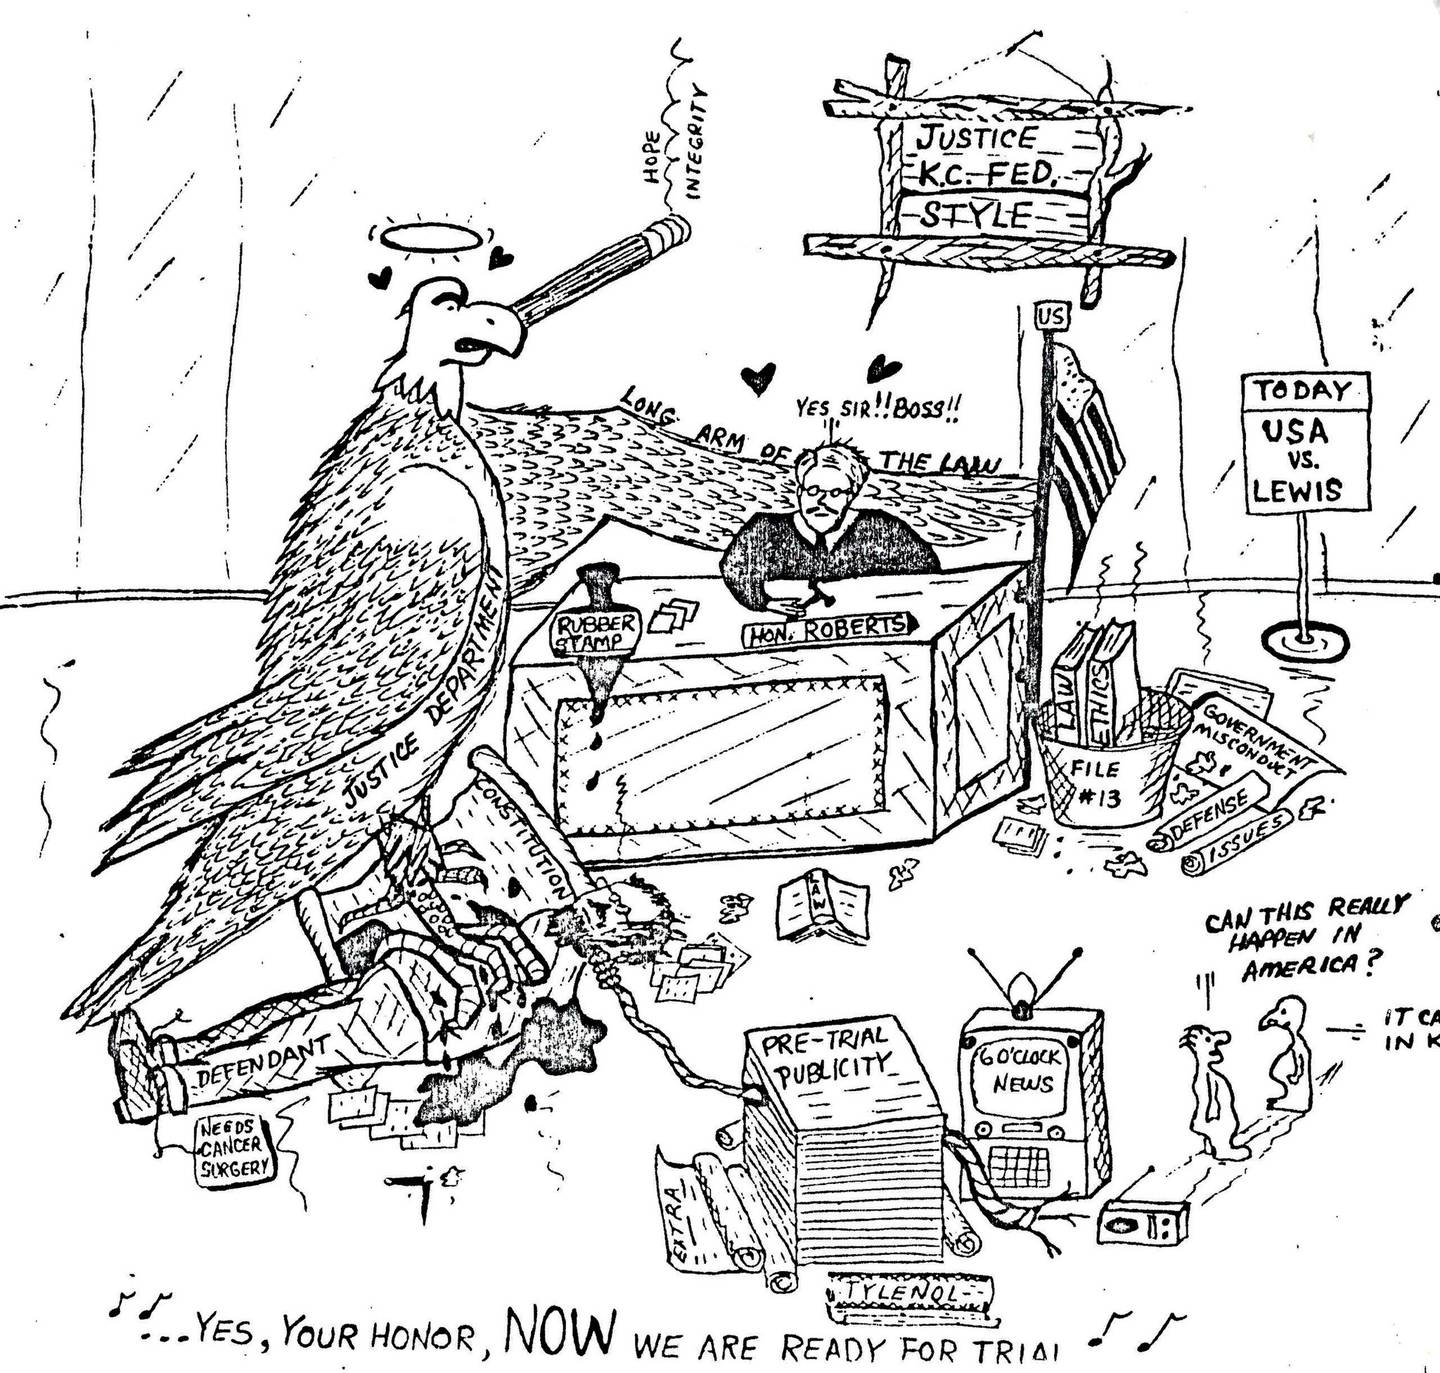 At his 1983 trial for mail fraud, James Lewis made a drawing that depicts the bearded and bespectacled defendant bleeding on the ground as a bald eagle representing the U.S. Department of Justice digs its talons into his torso. 